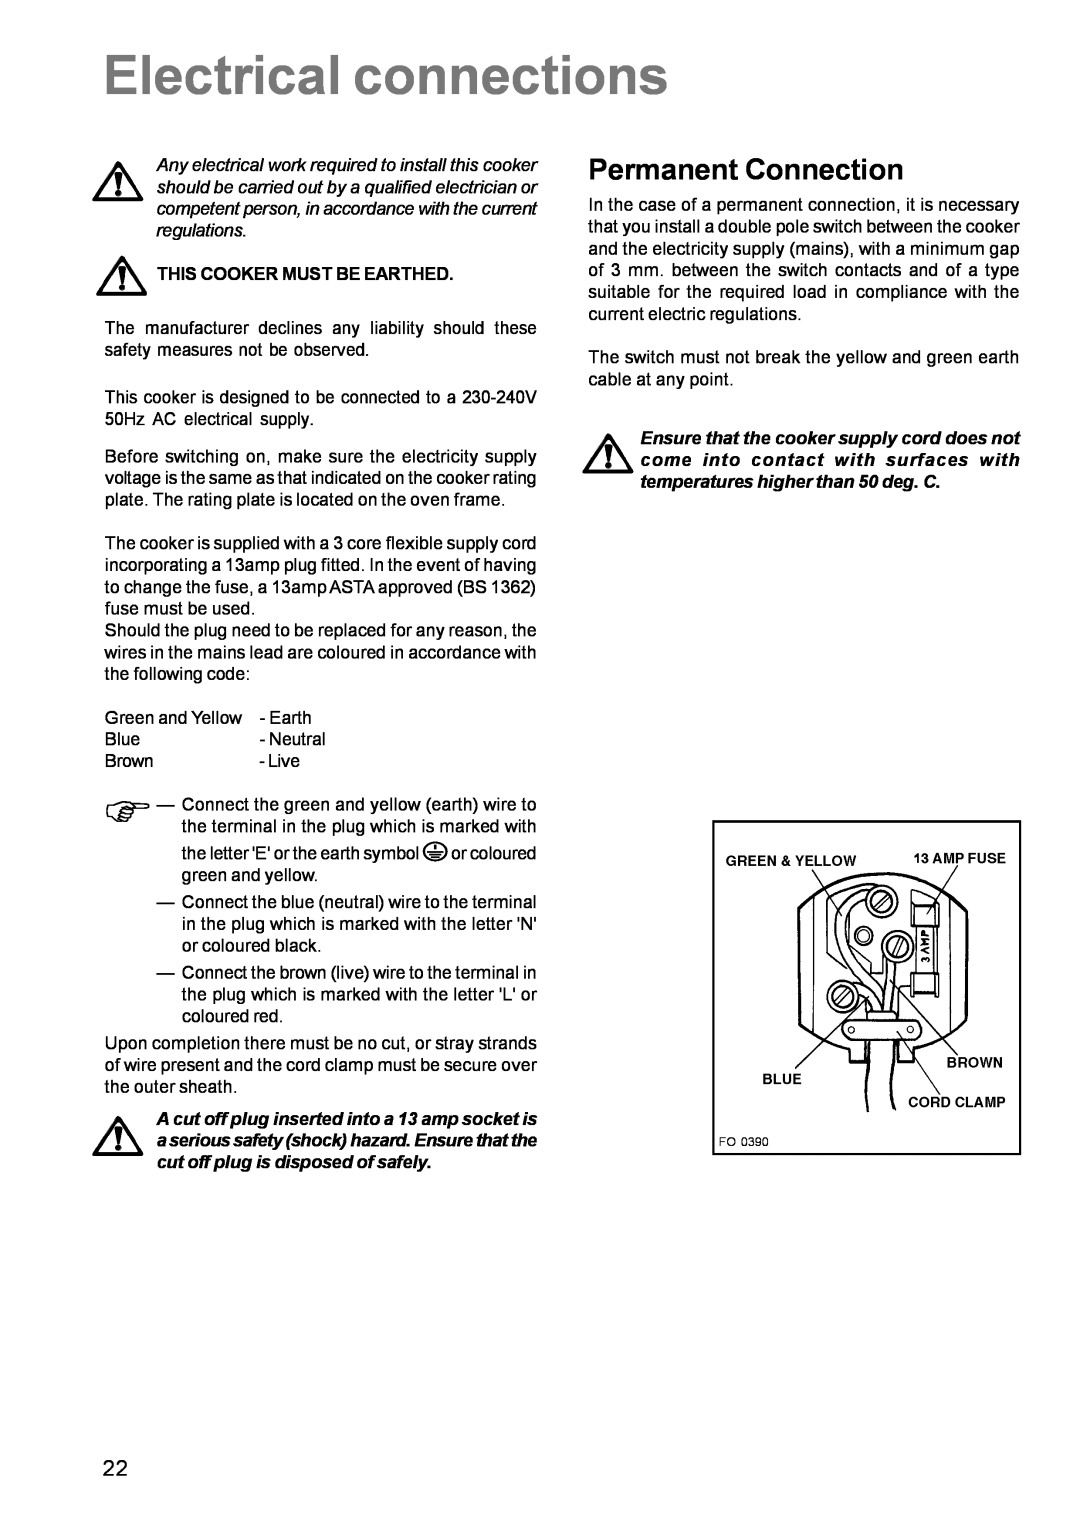 Zanussi ZCM 611 manual Electrical connections, Permanent Connection 